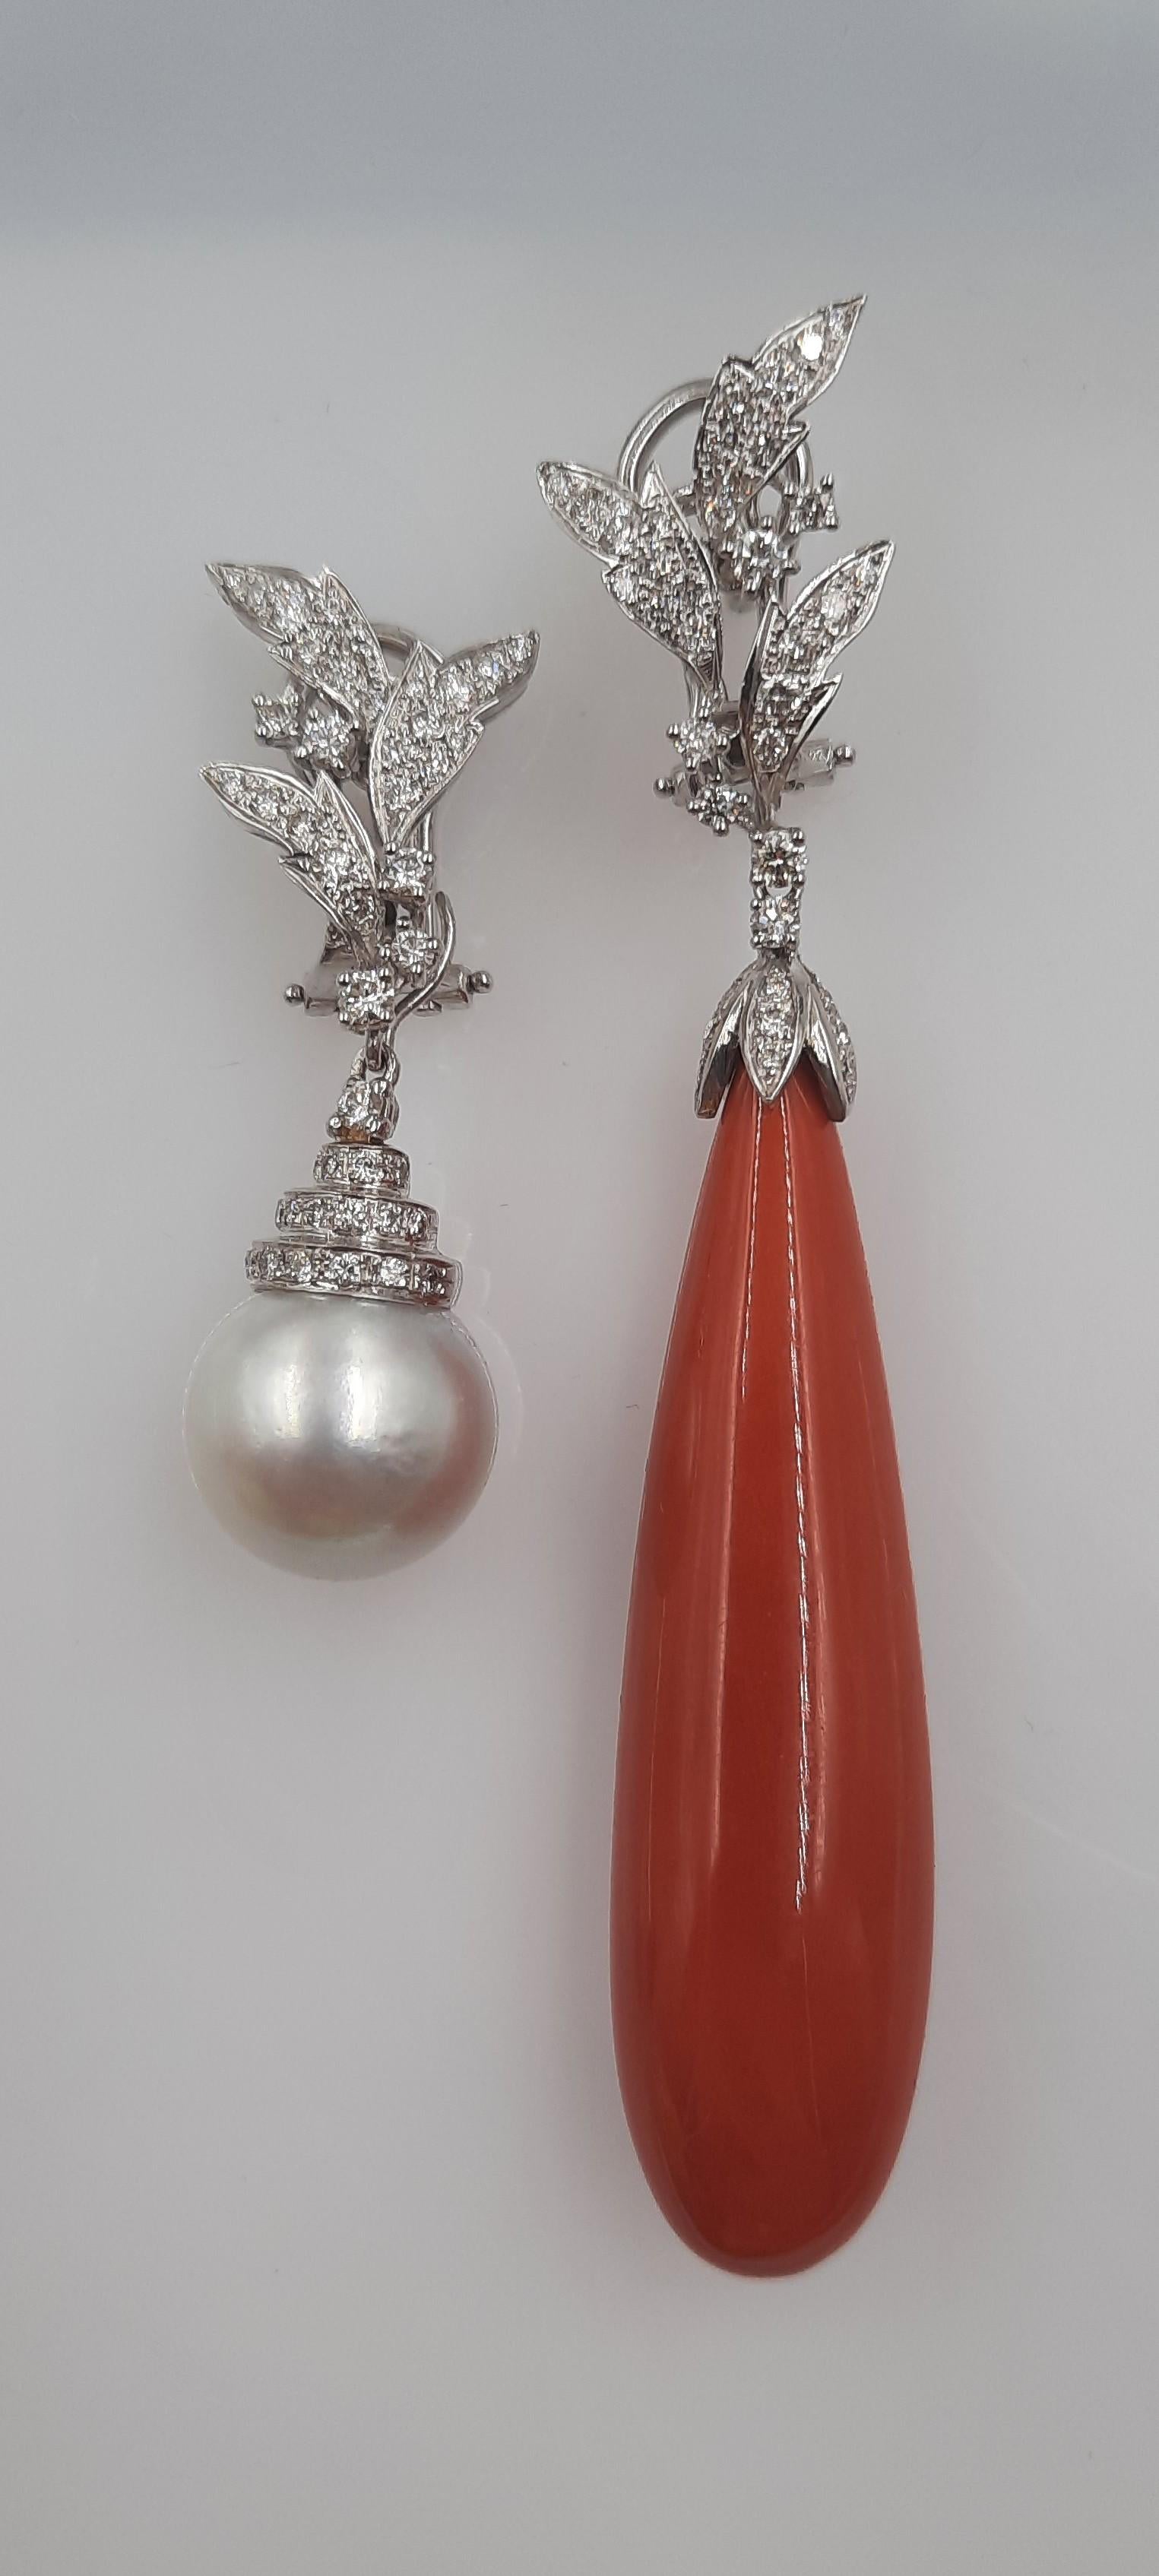 Very elegant and big brilliant cut diamond (1.28 carats), red natural coral (22.4 grams), 18 carats white gold 
(9.5grams) drop earrings. Is it possible to wear the earrings without drops, or change the drop with other drop (amber, turquoise,